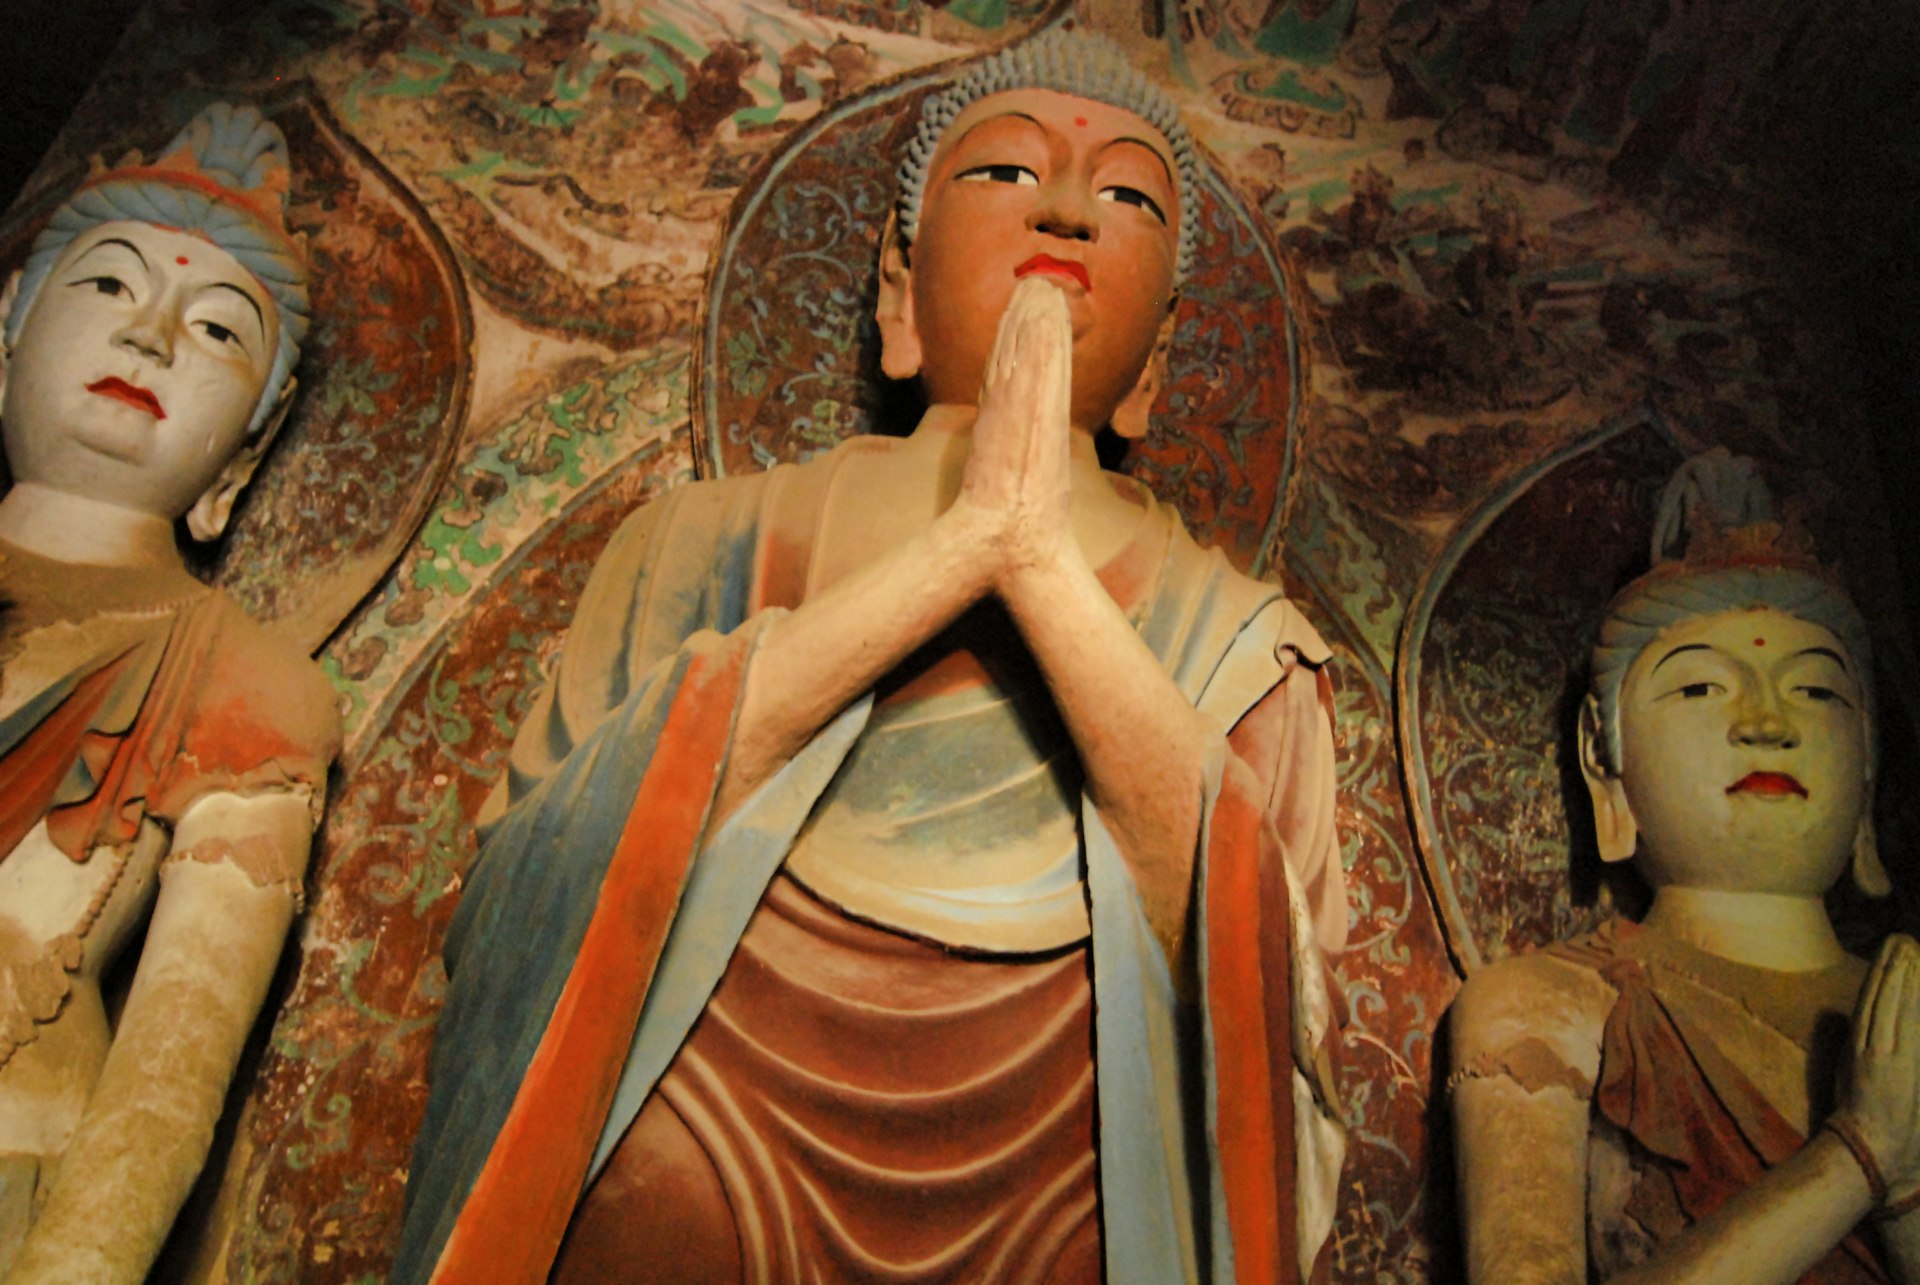 Buddha scultpures in the Mogao Caves, Dunhuang, China